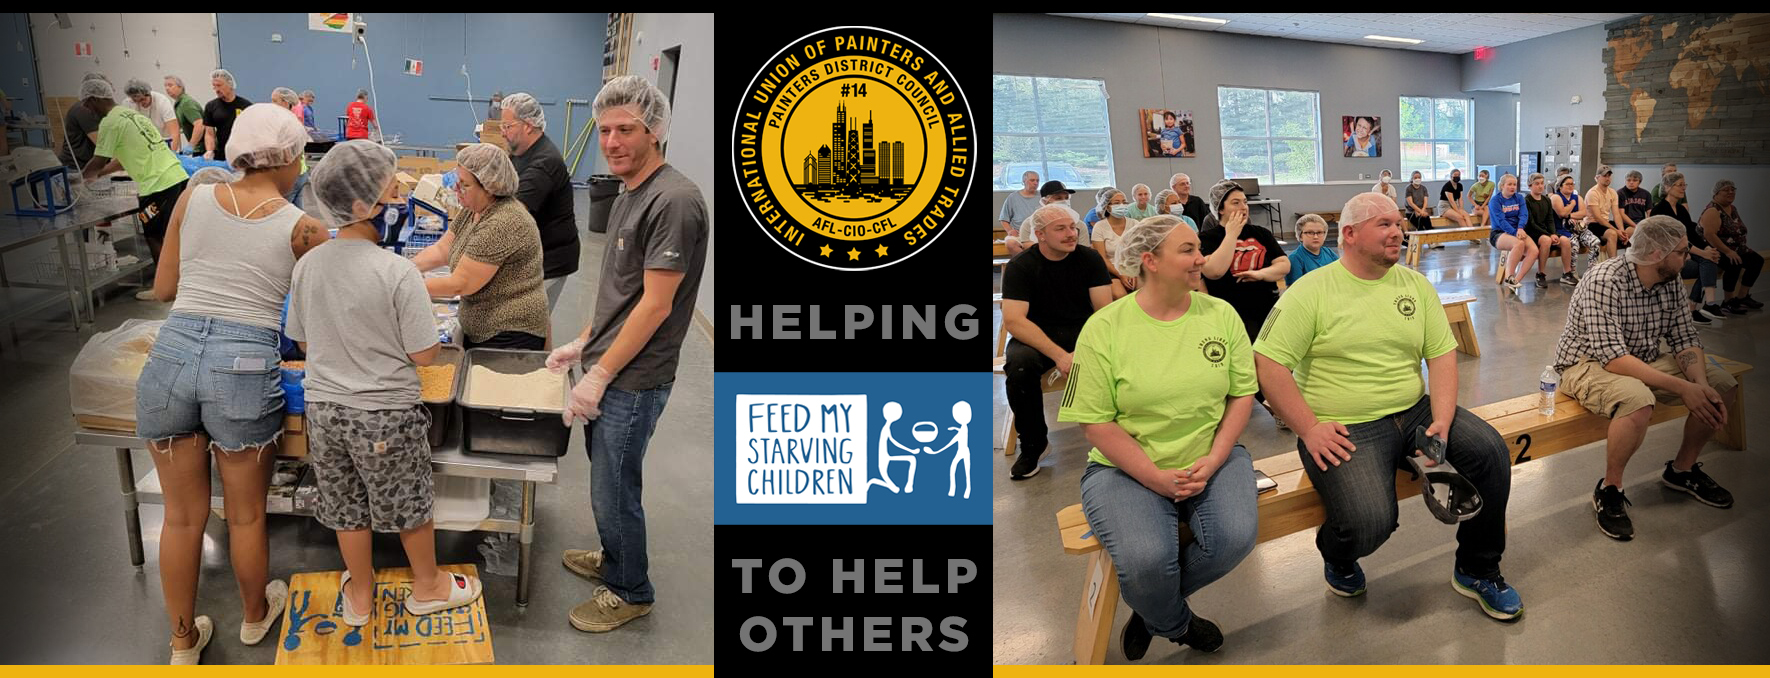 DC14 Chicago’s Young Lions Help Feed My Starving Children